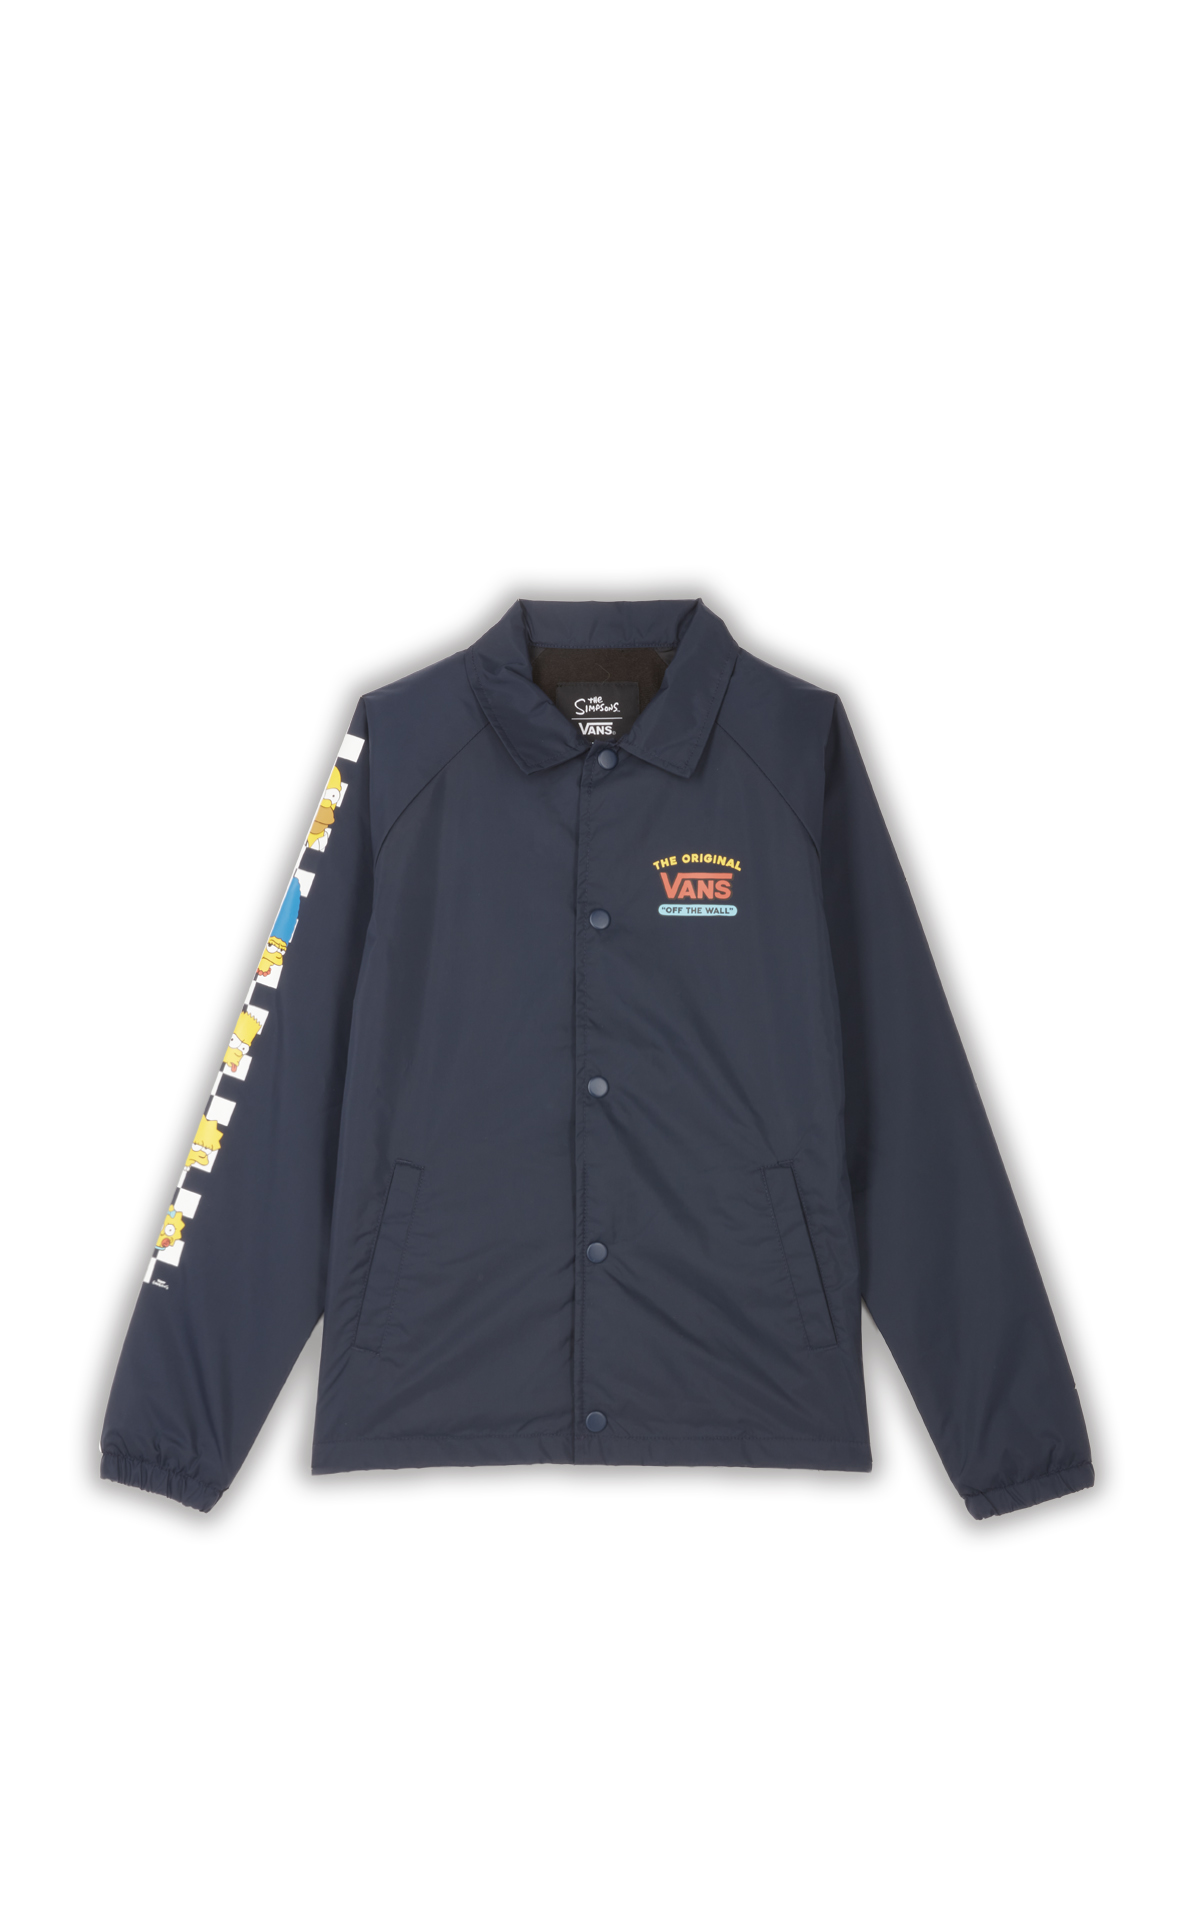  'The Simpsons' limited edition windbreaker